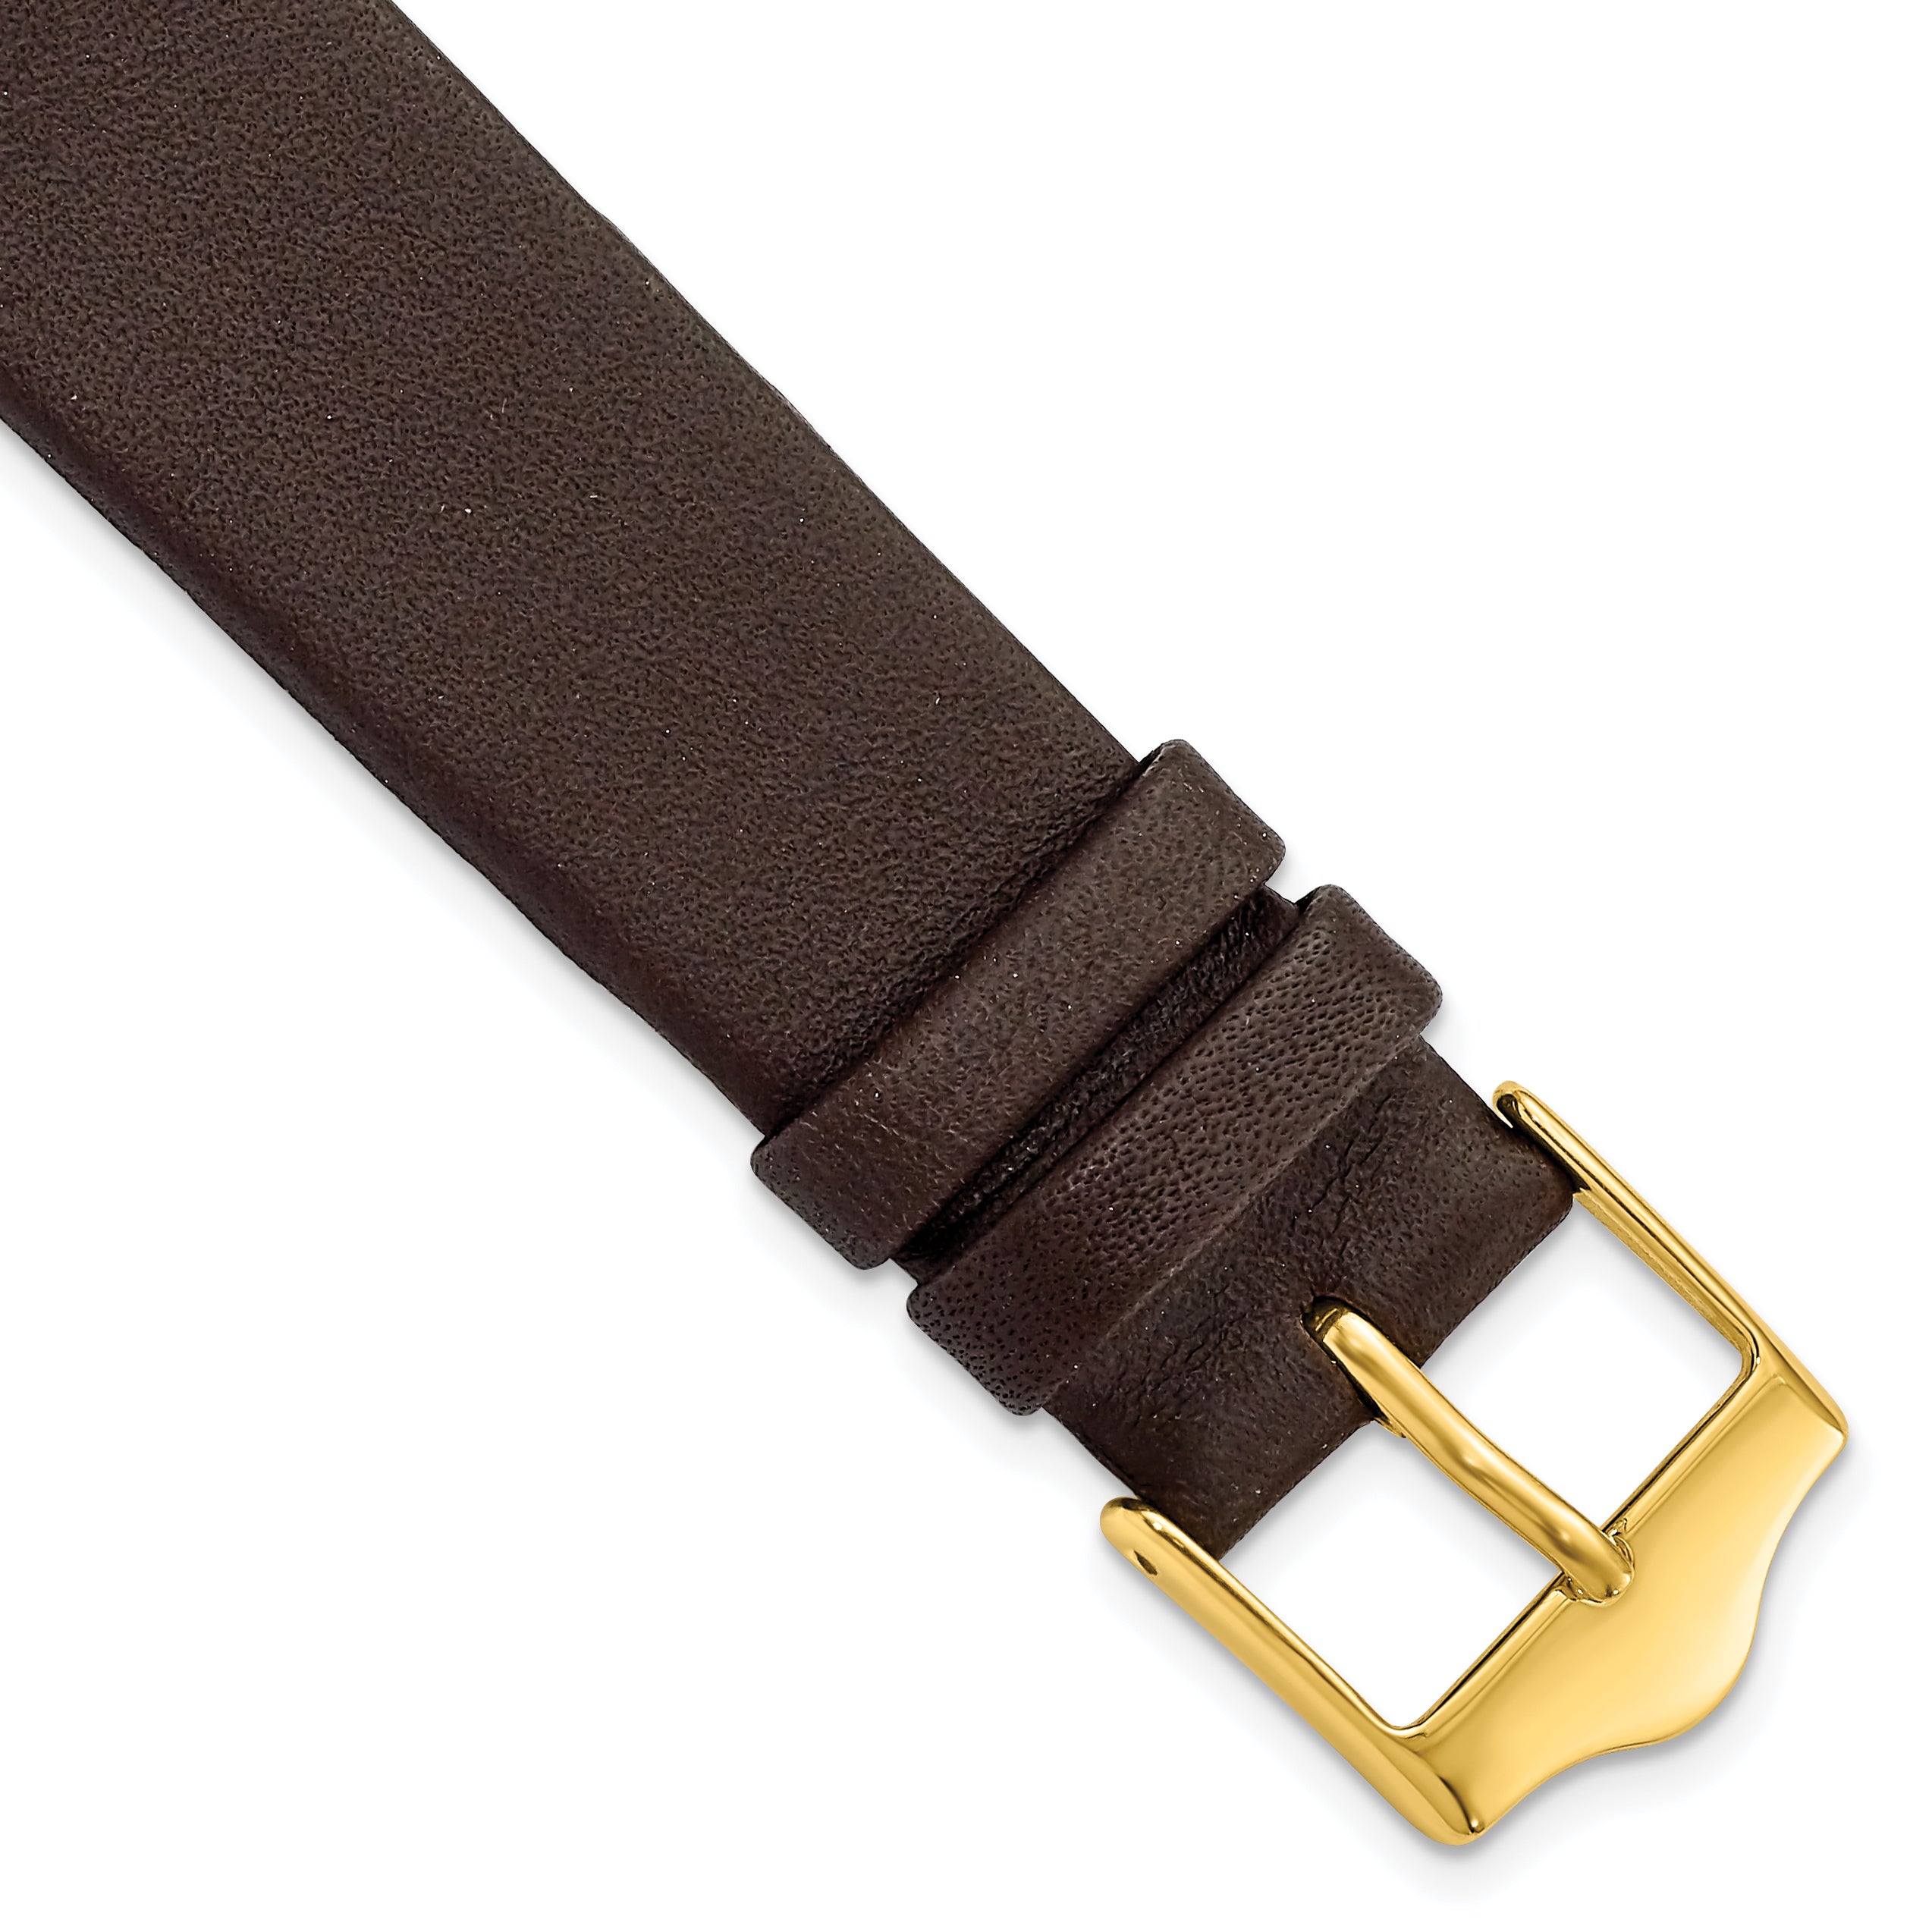 DeBeer 19mm Brown Smooth Flat Leather with Gold-tone Buckle 7.5 inch Watch Band